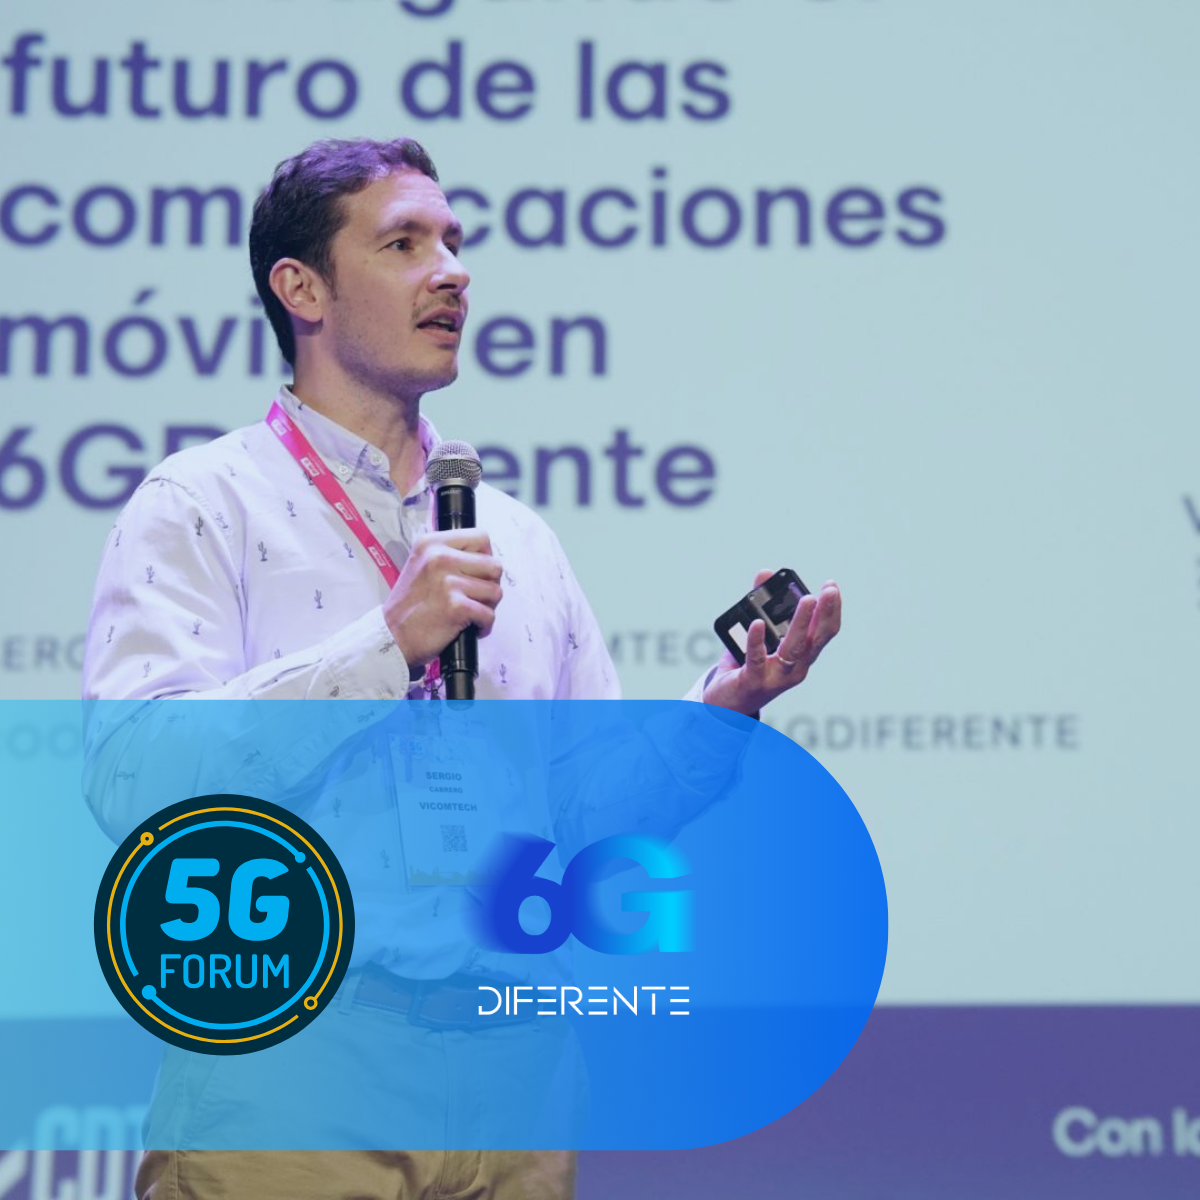 Vicomtech participates in the seventh edition of the 5G FORUM Conference in Seville presenting the new project 6G DIFERENTE